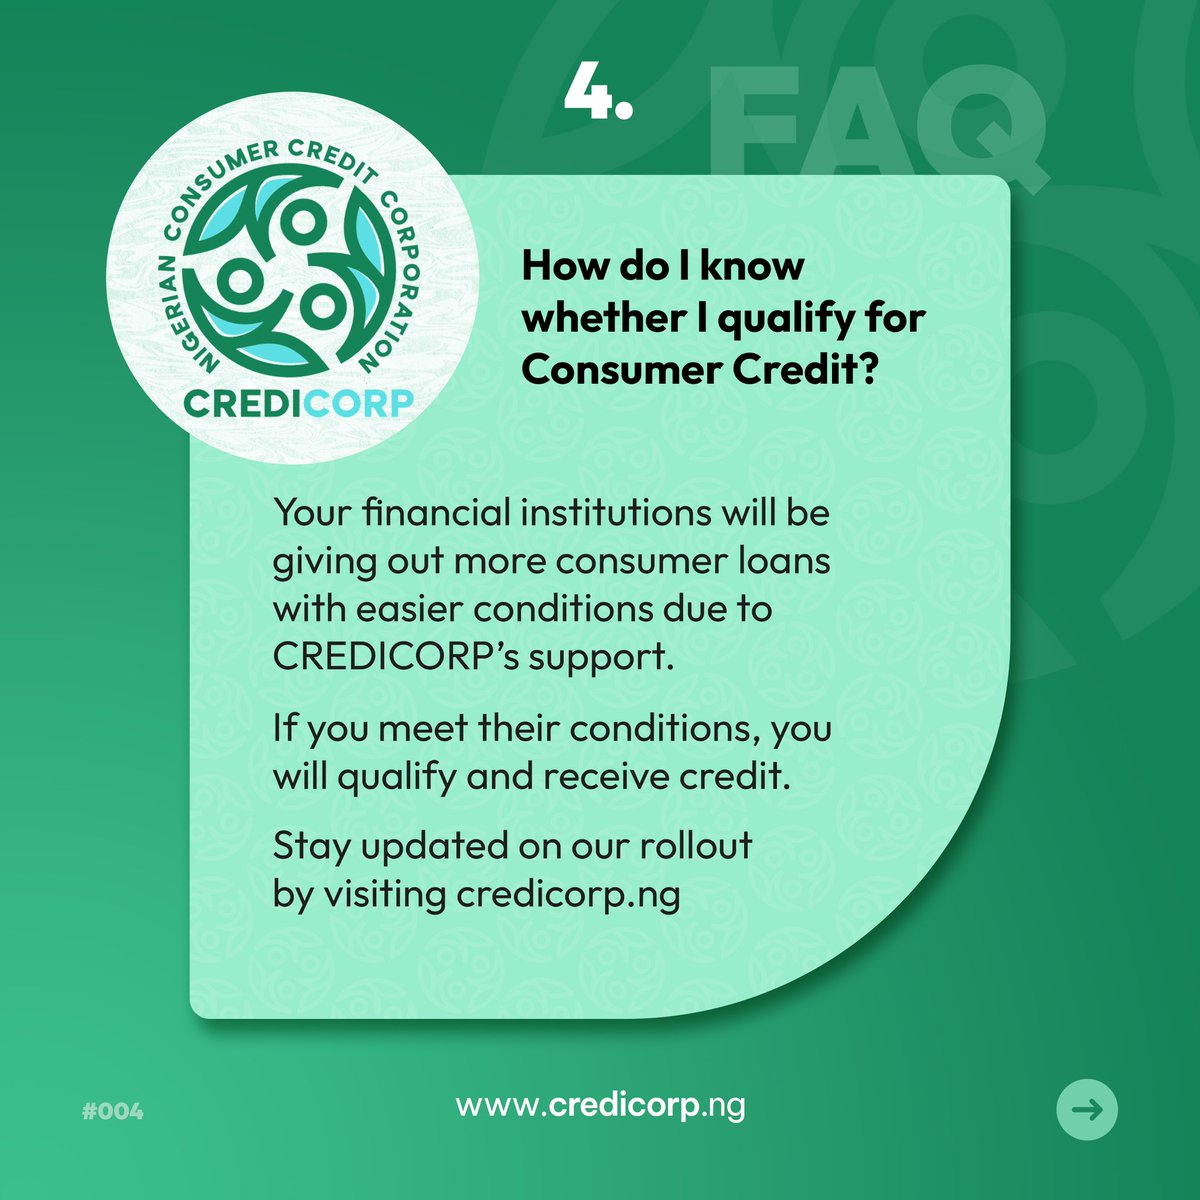 Find answers to common questions in our FAQ guide

#CREDICORP #ConsumerCredit